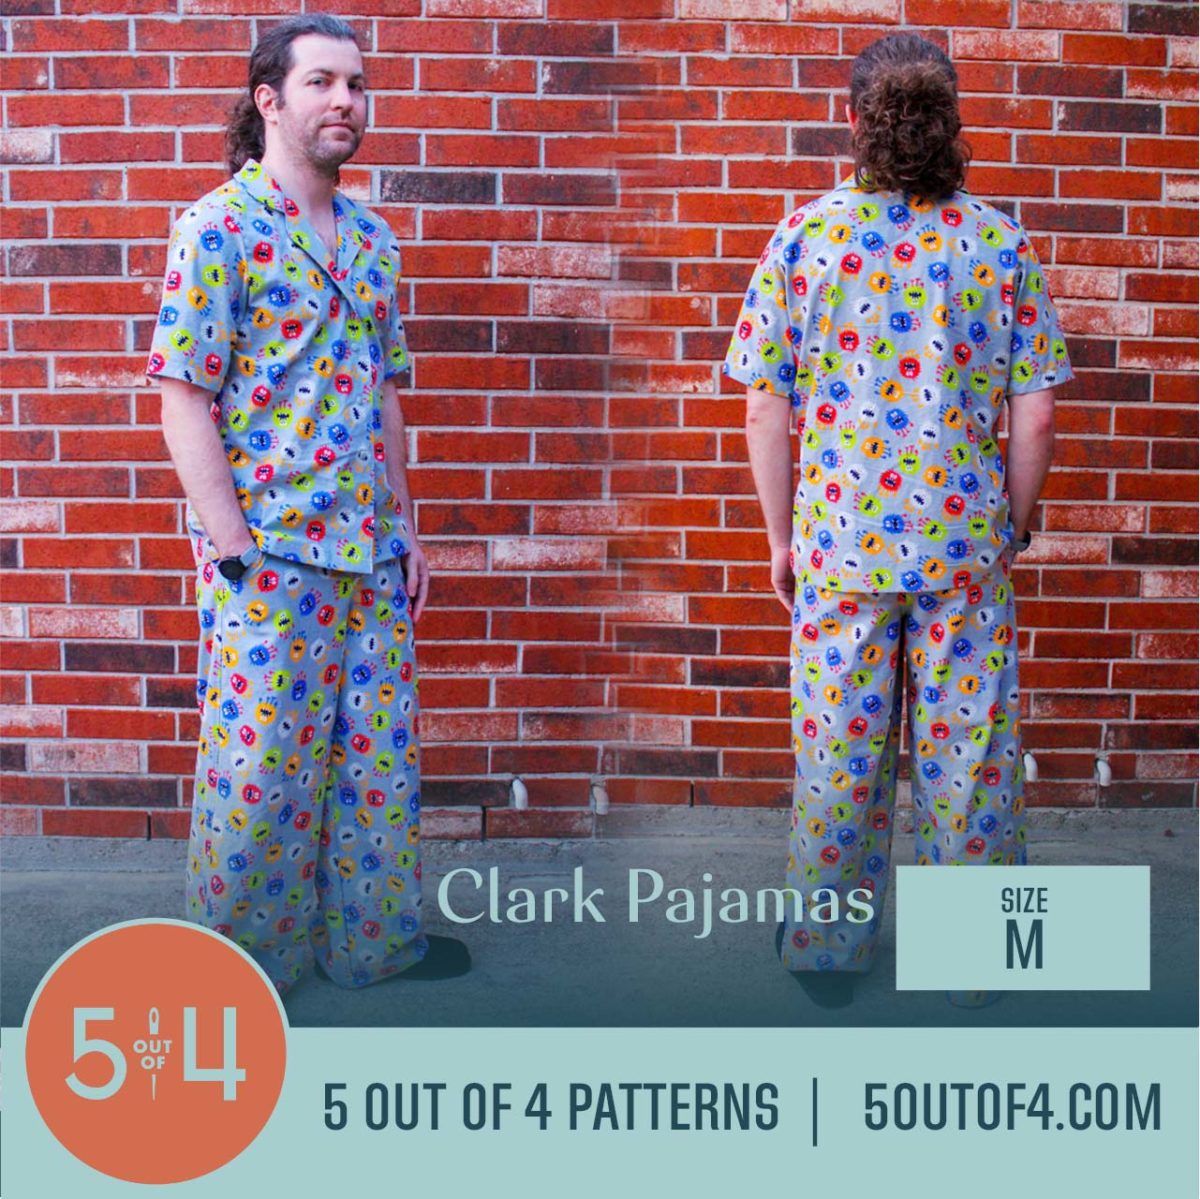 5oo4 Woven Pajama Pattern for Men size M